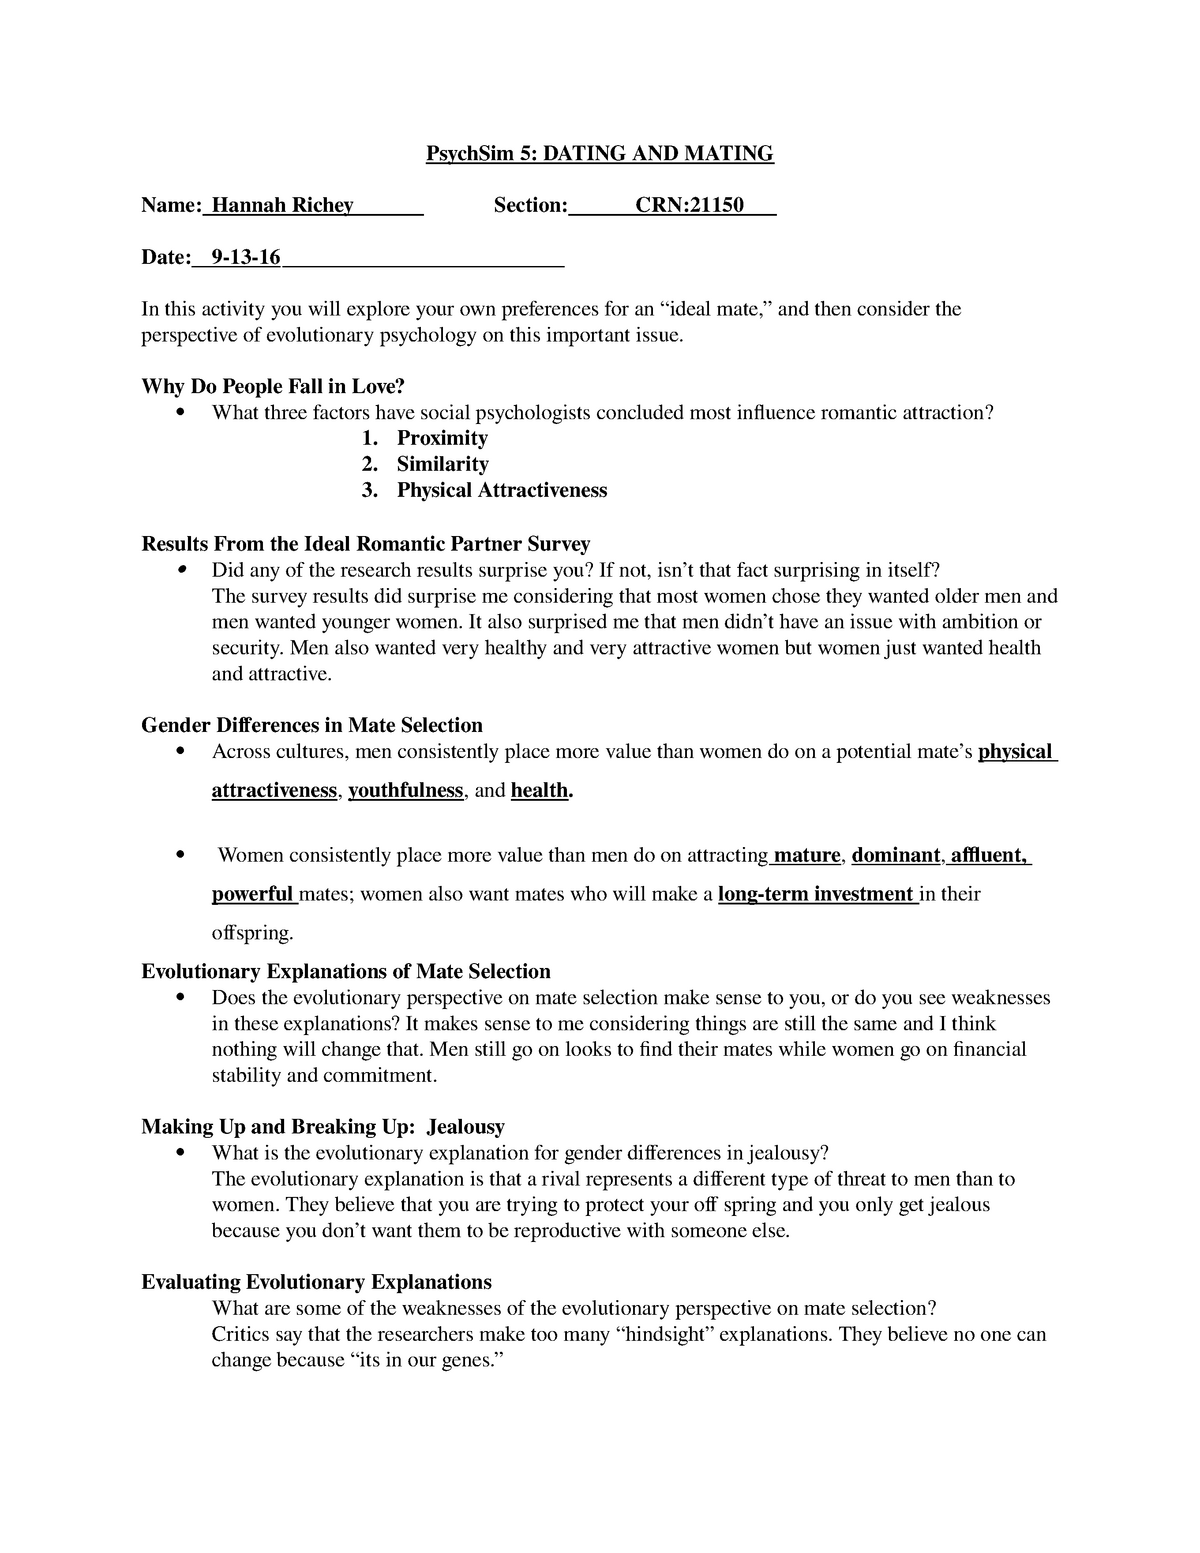 5 worksheets answers psychsim 